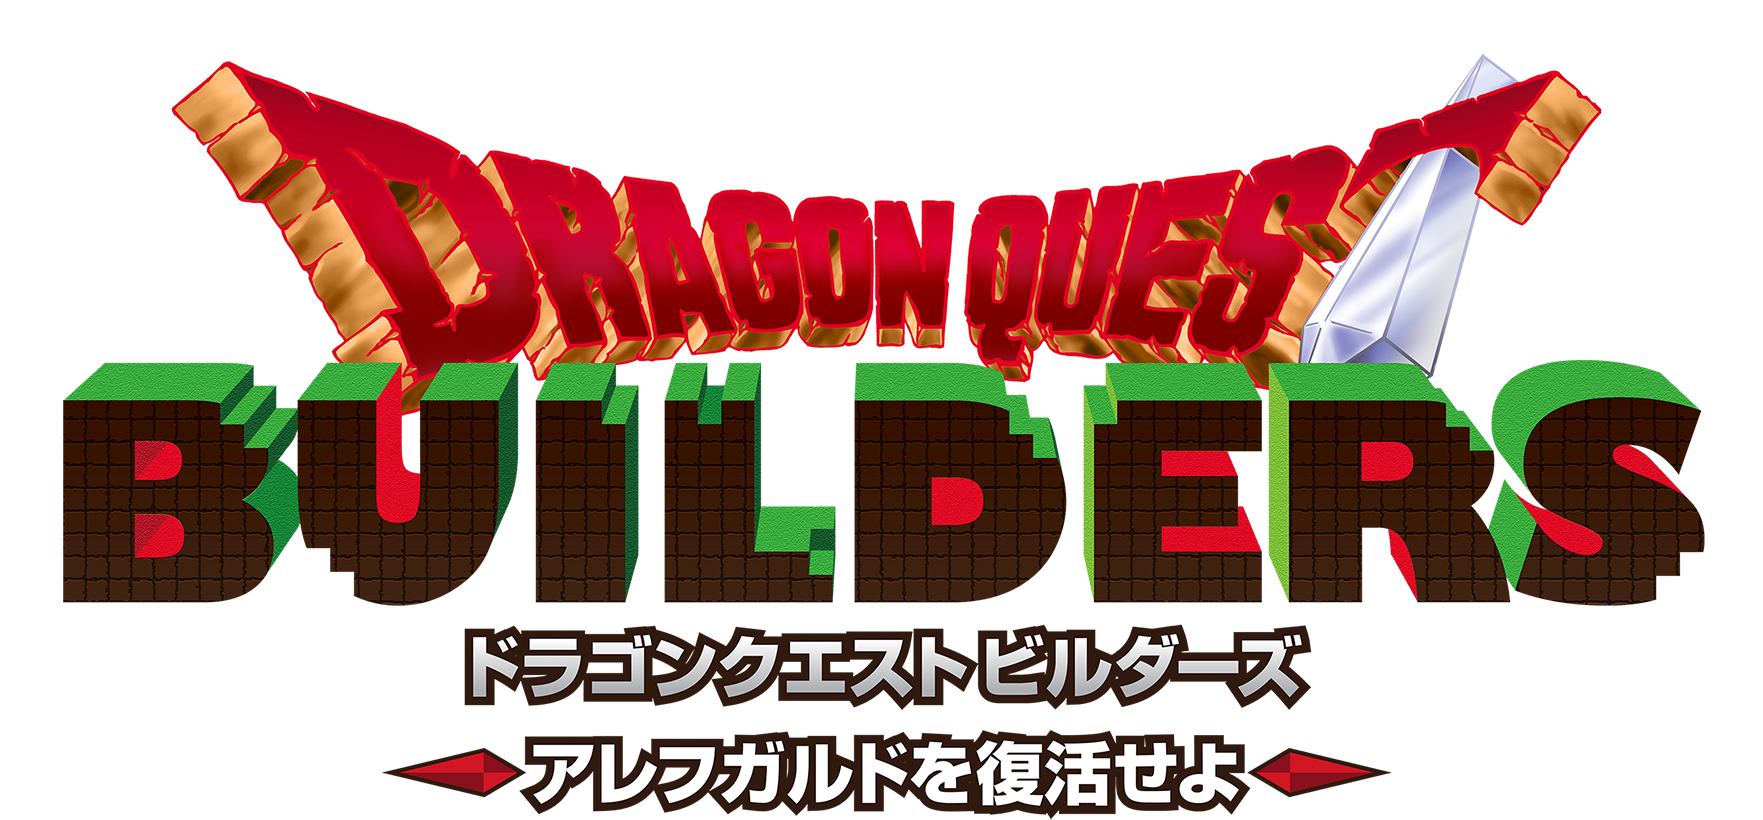 Logo Hyoukinashi - Dragon Quest Builders (ps4) (2000x1153), Png Download